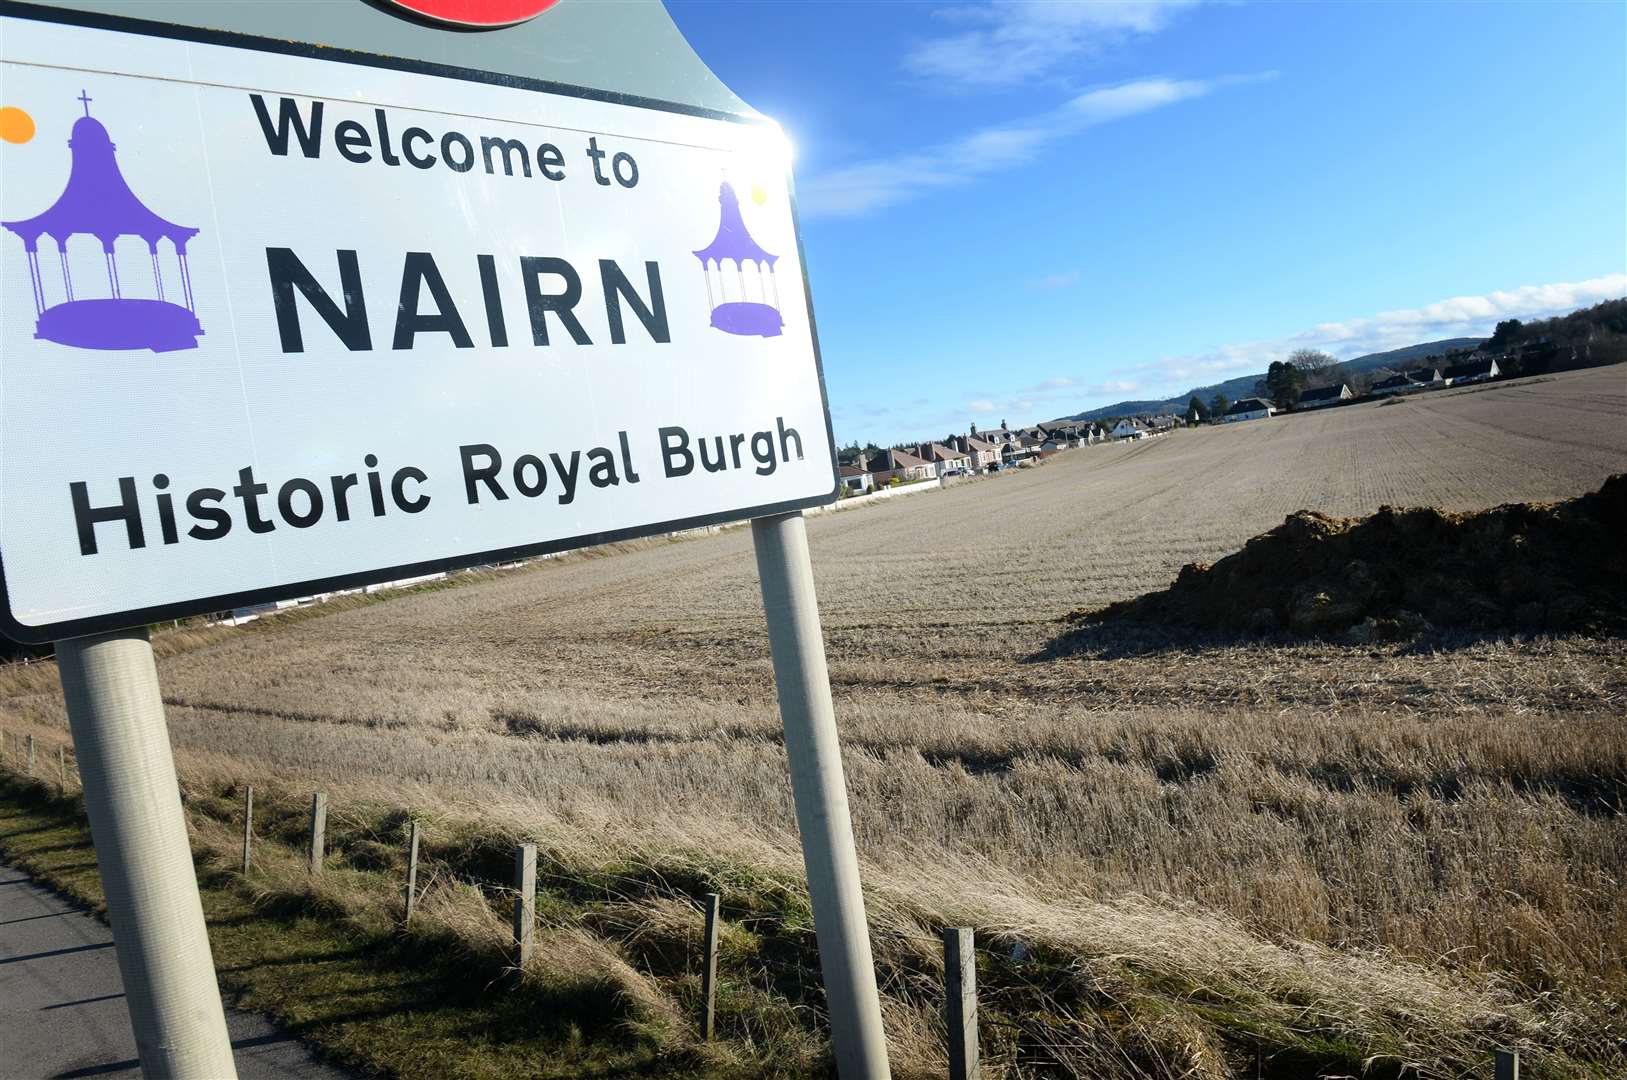 Councillors are to discuss ways that developer contributions for Nairn projects could be allocated differently.